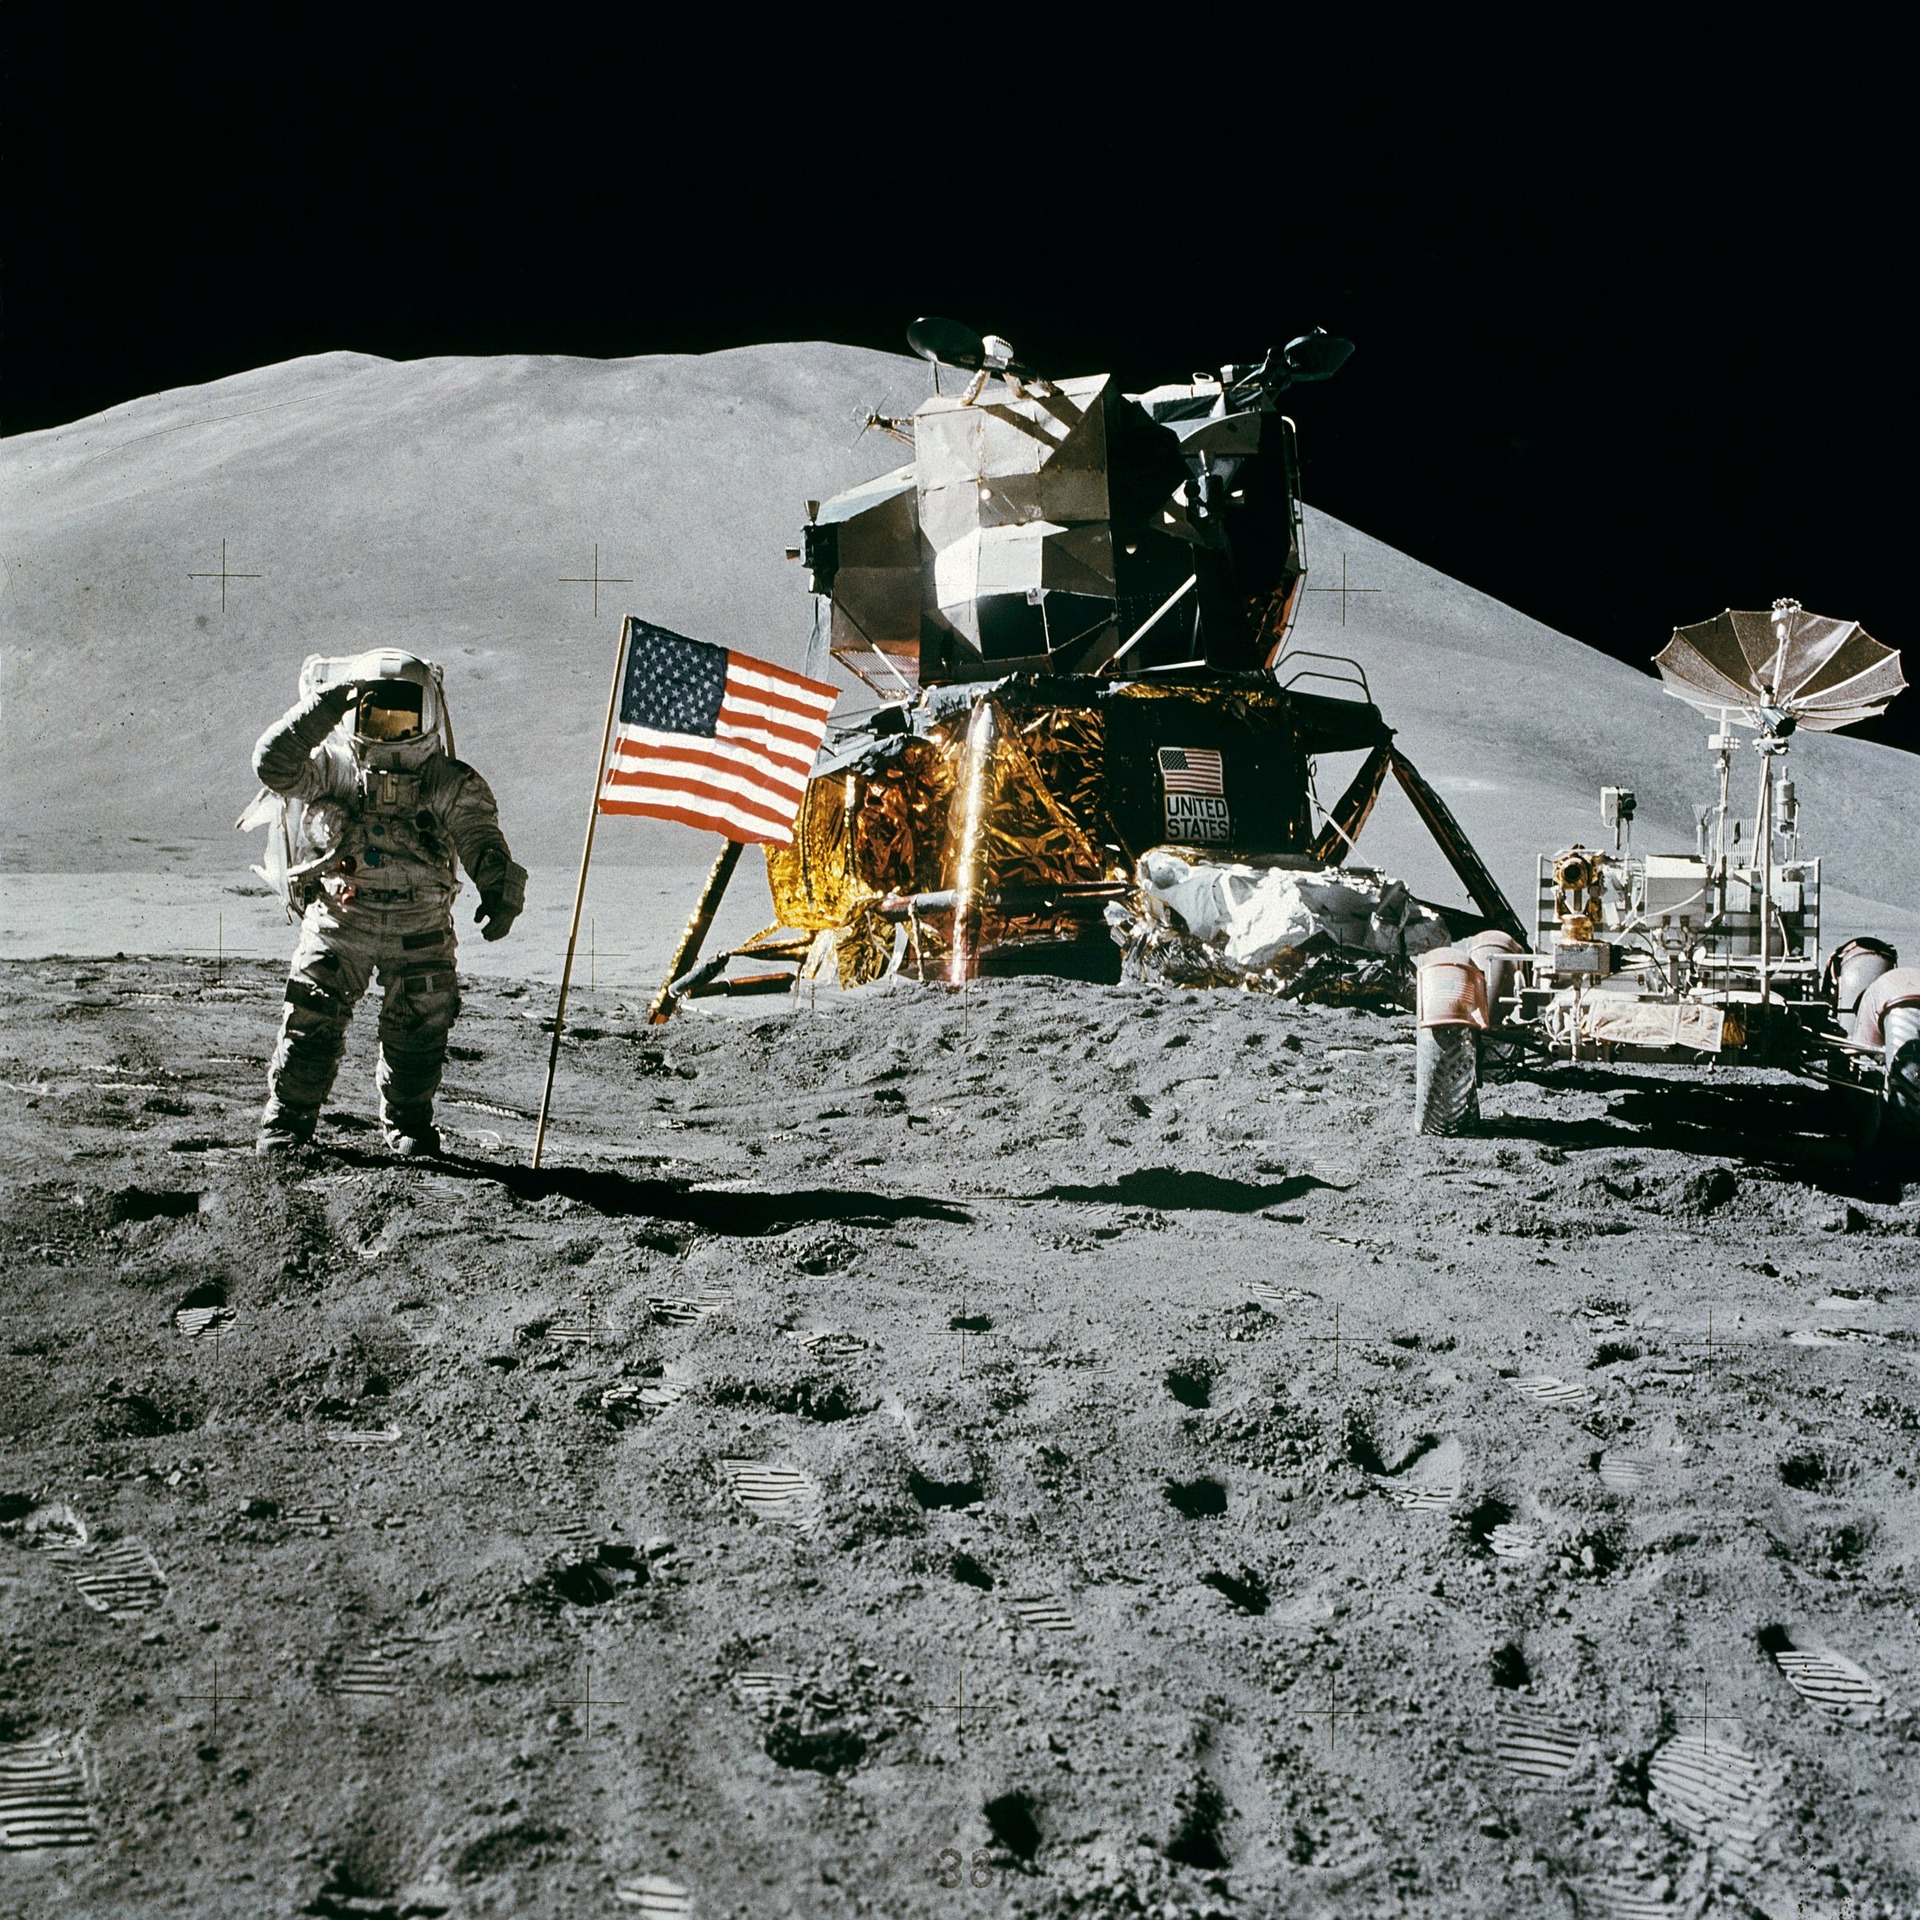 an astronaut on the surface of the moon with American flag and space ship